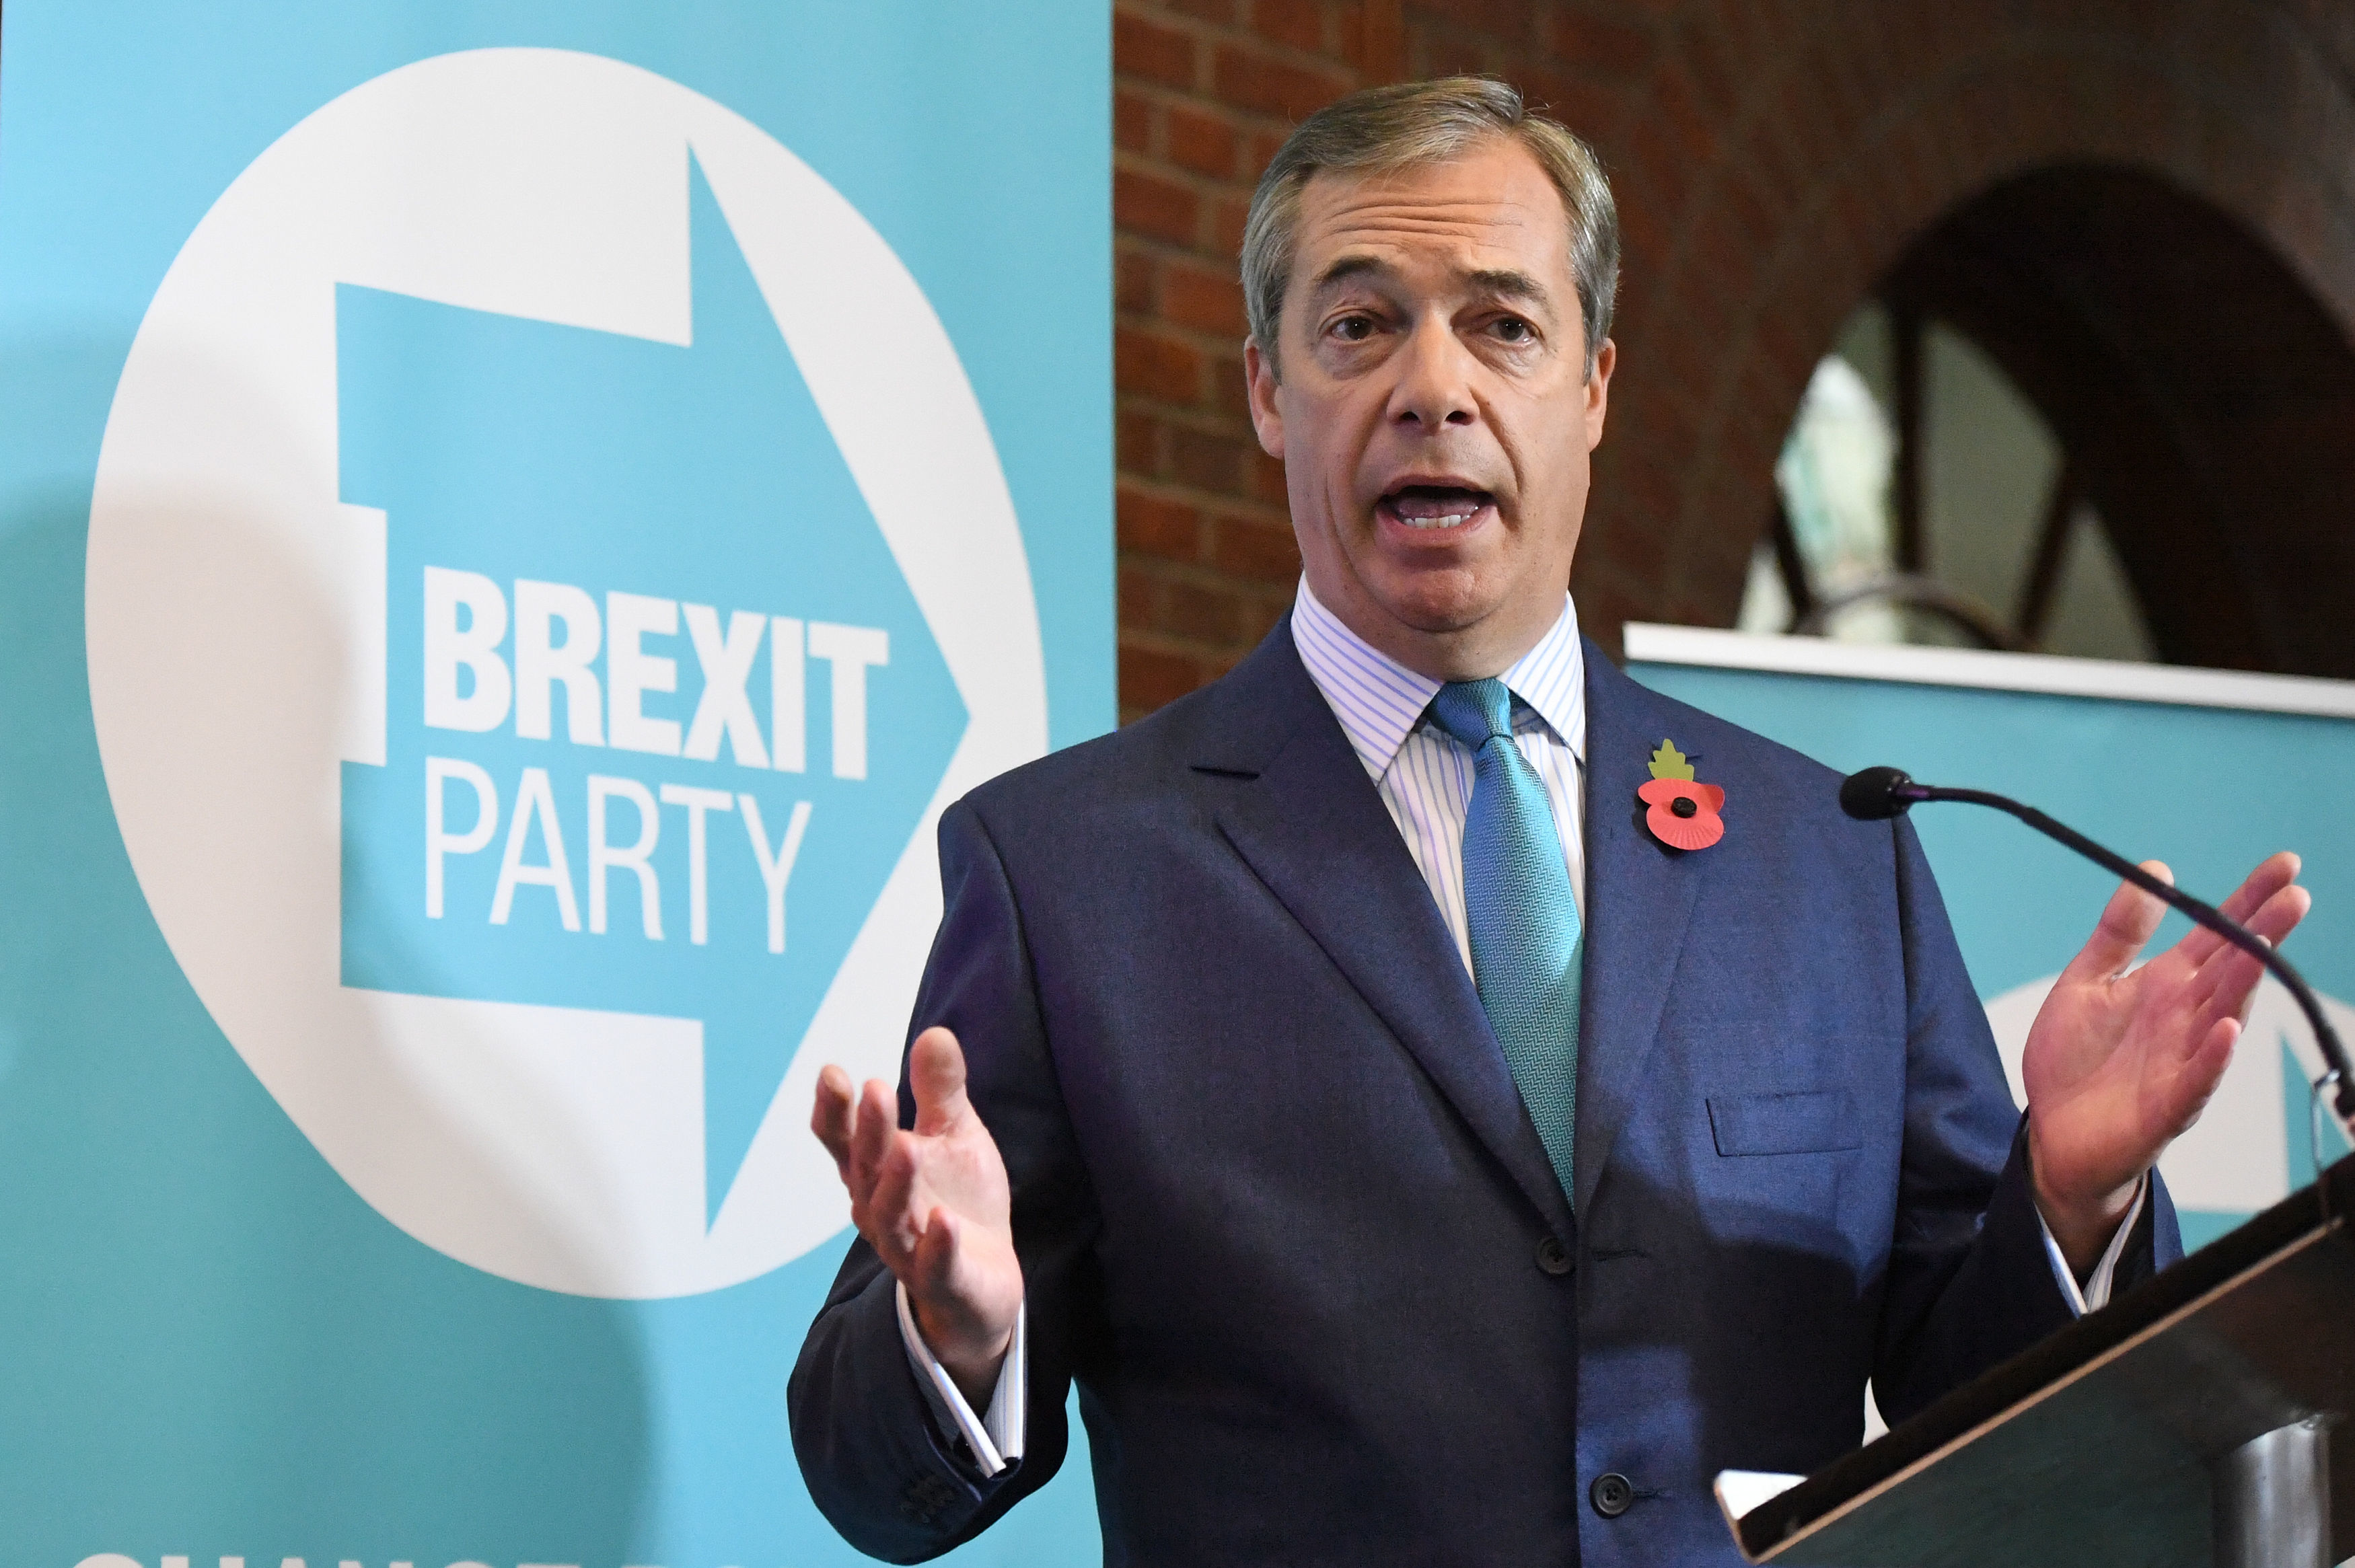 Nigel Farage at the Brexit Party's General Election campaign launch